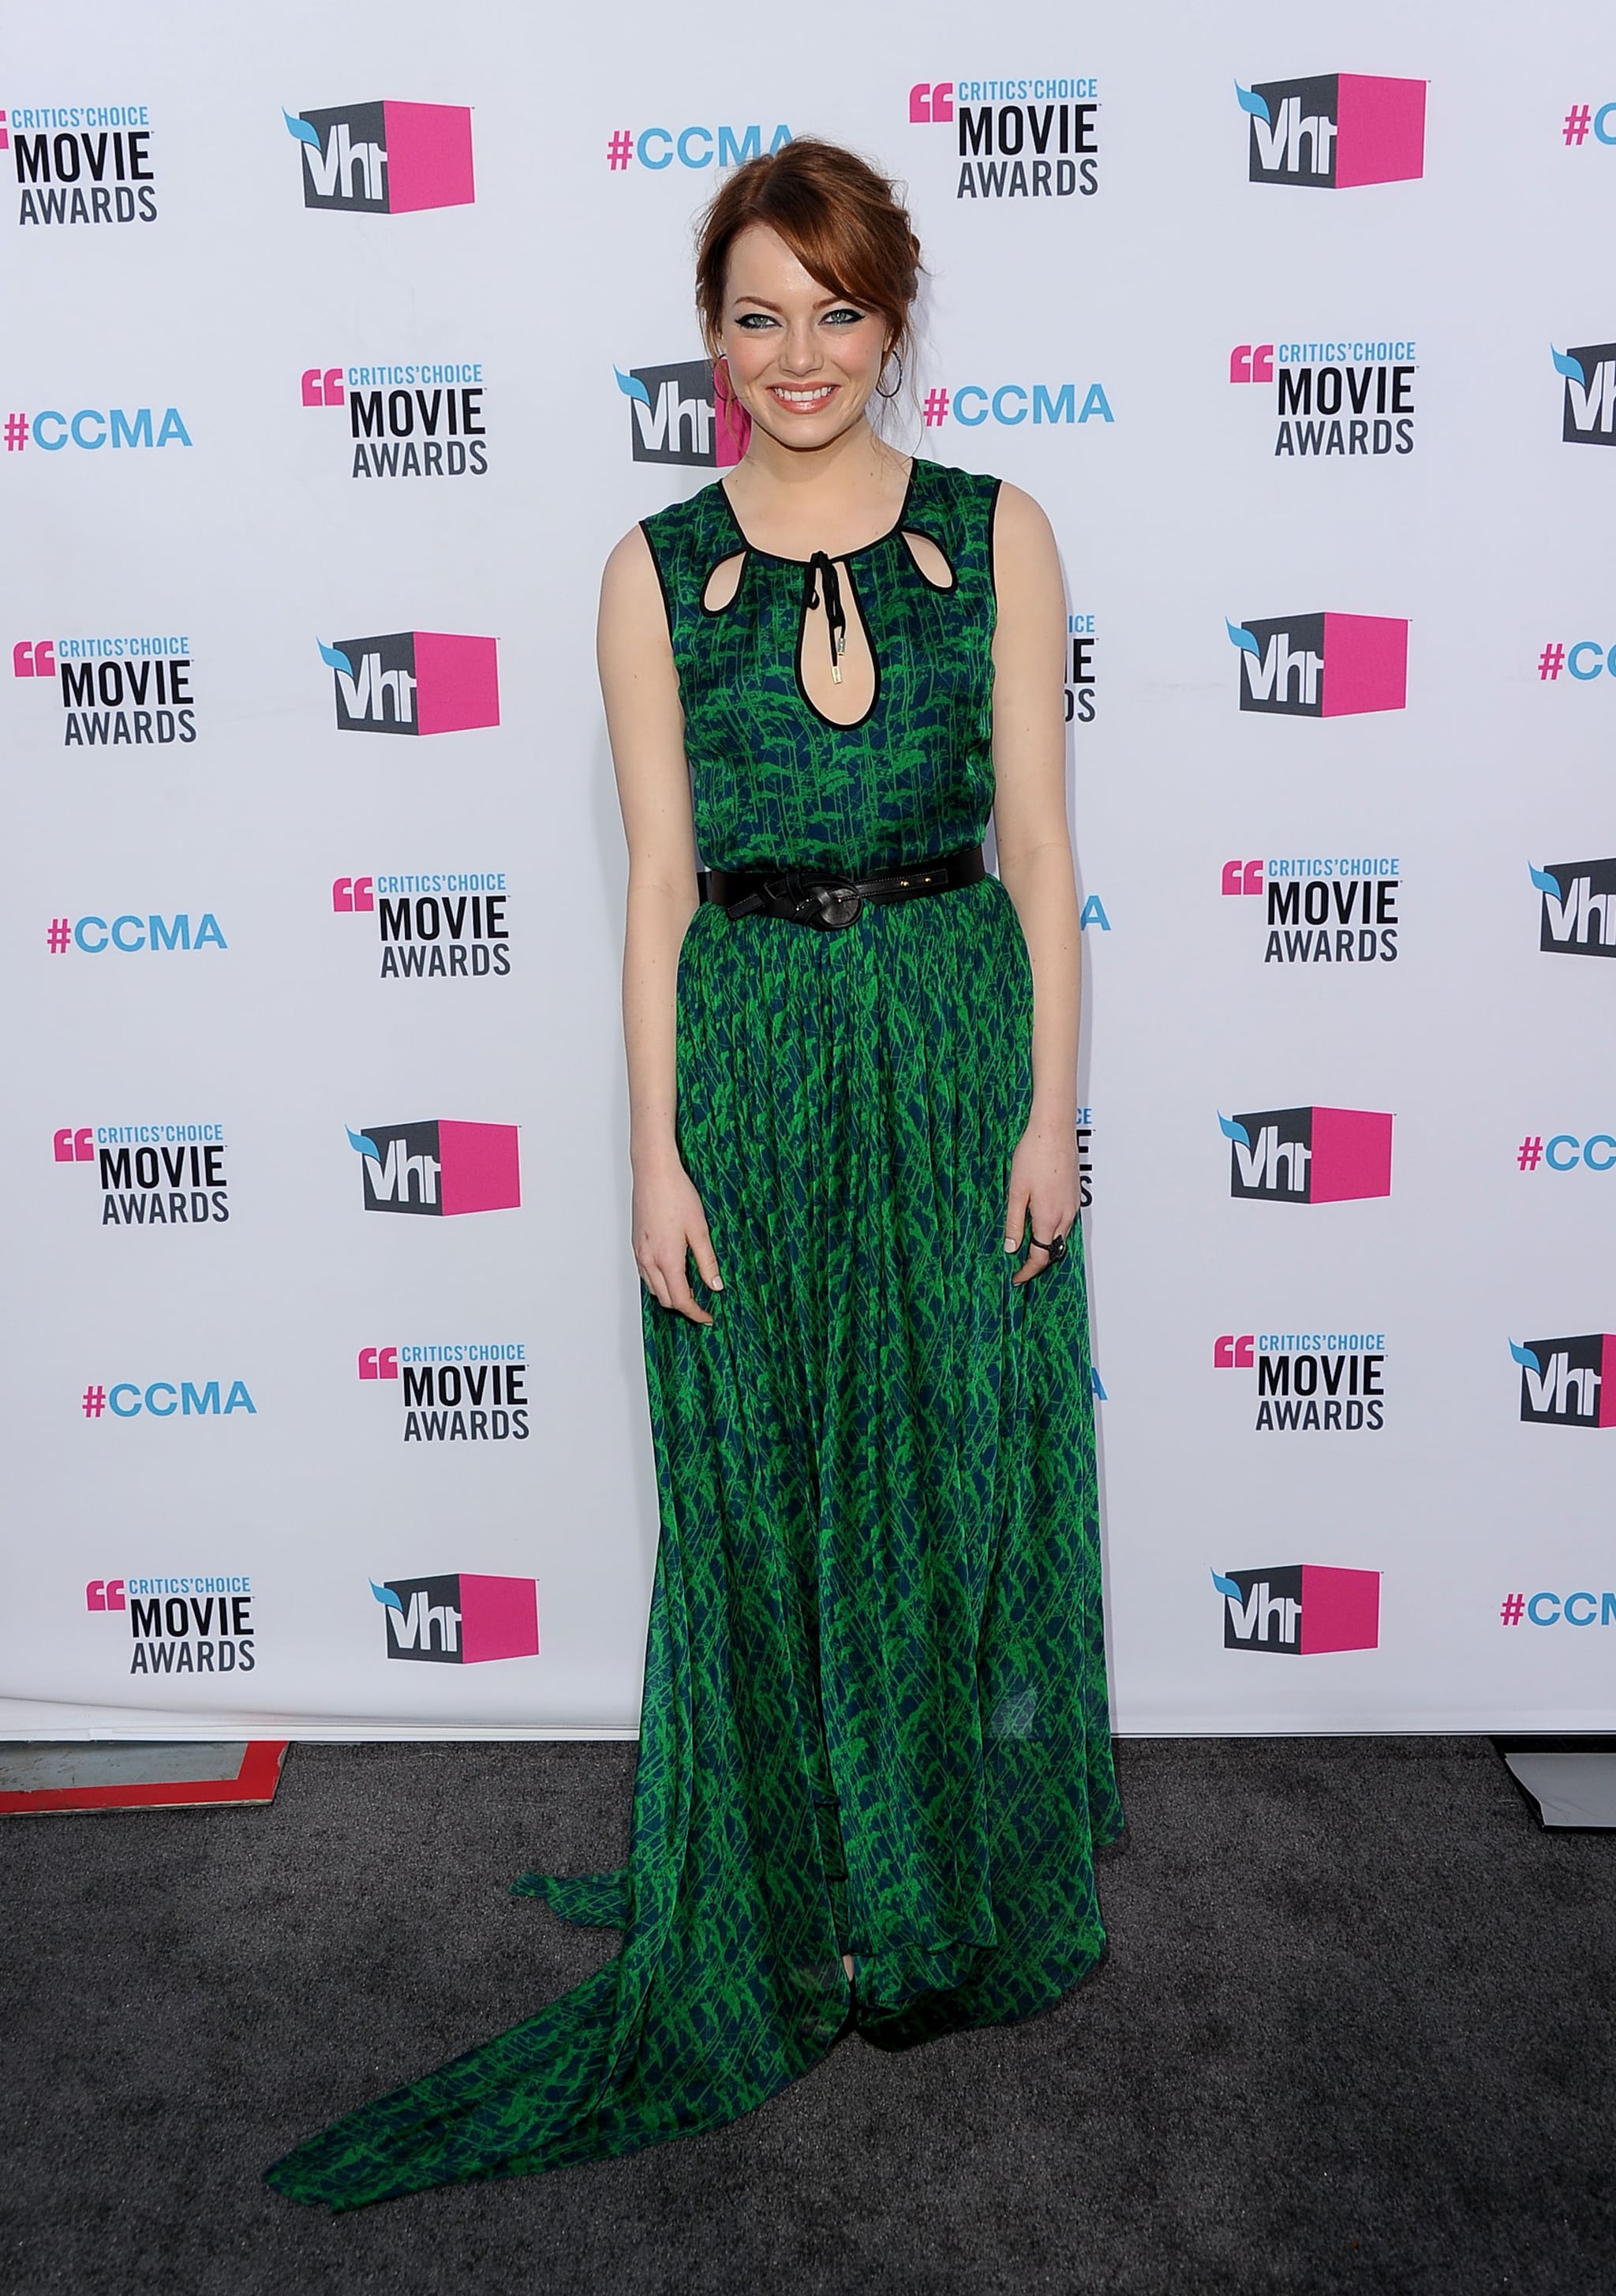 Emma Stone was in a green dress at the 2012 Critics' Choice Movie Awards.